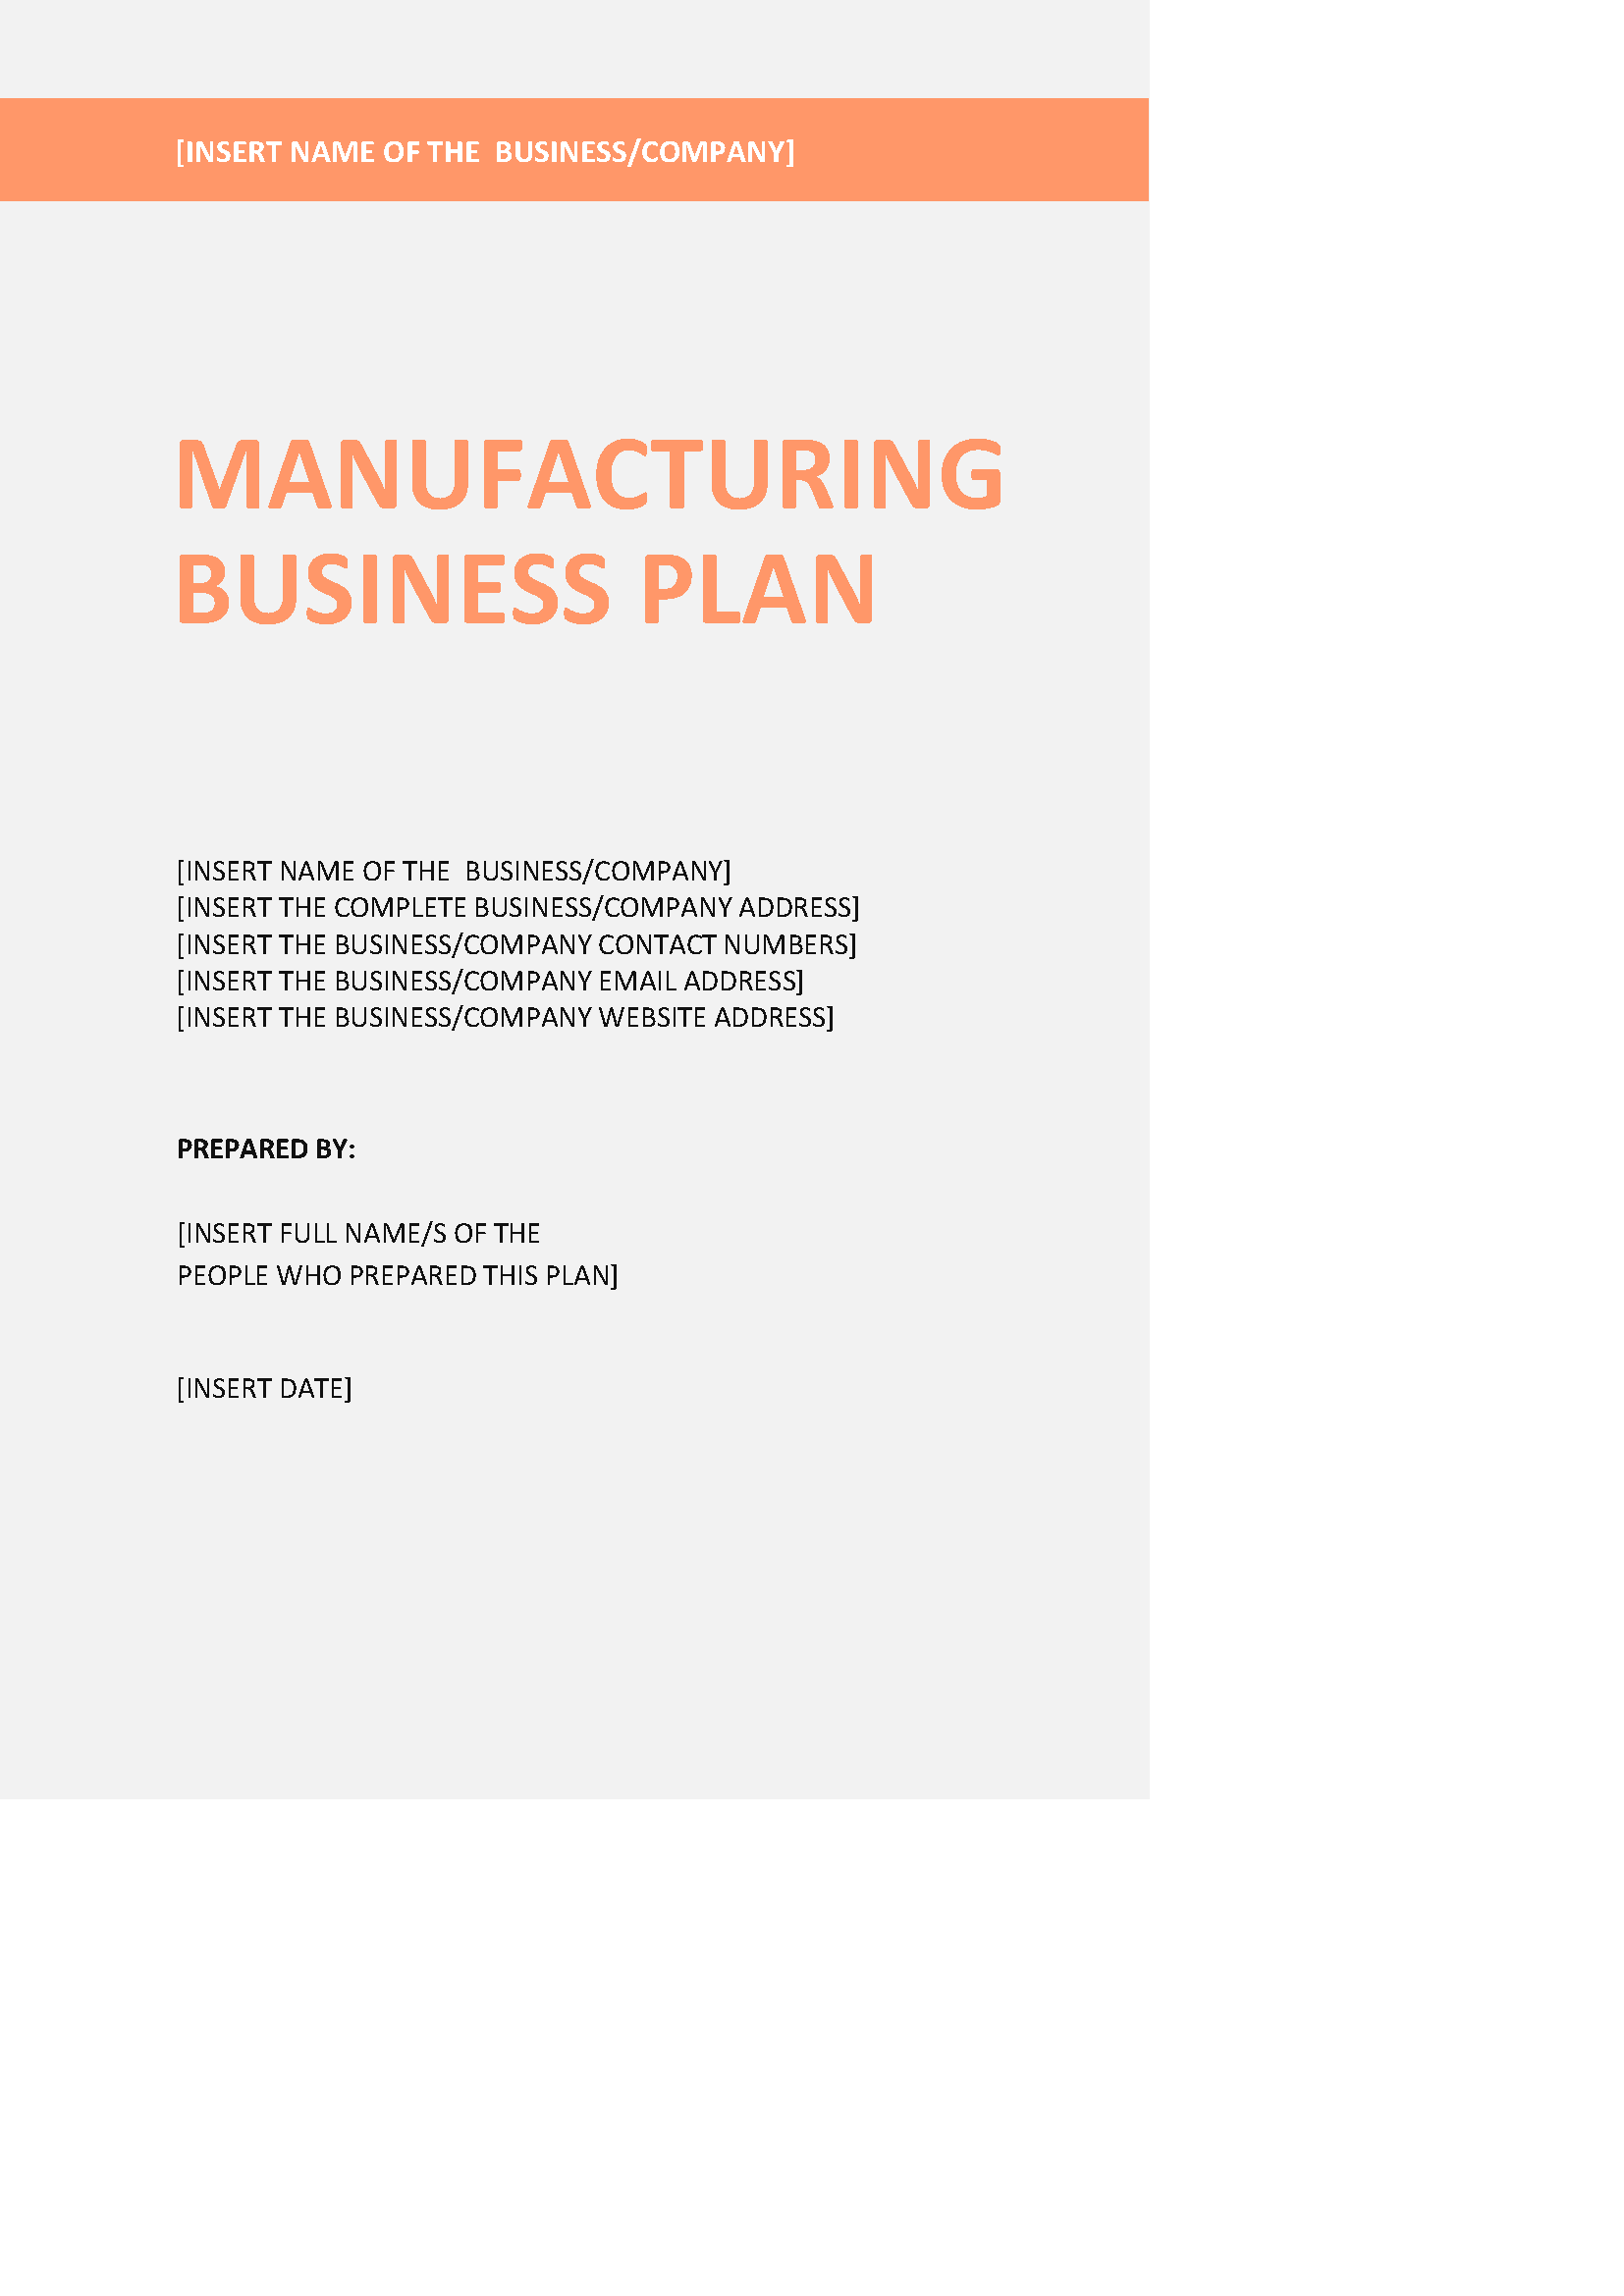 6 - Manufacturing Business Plan Template